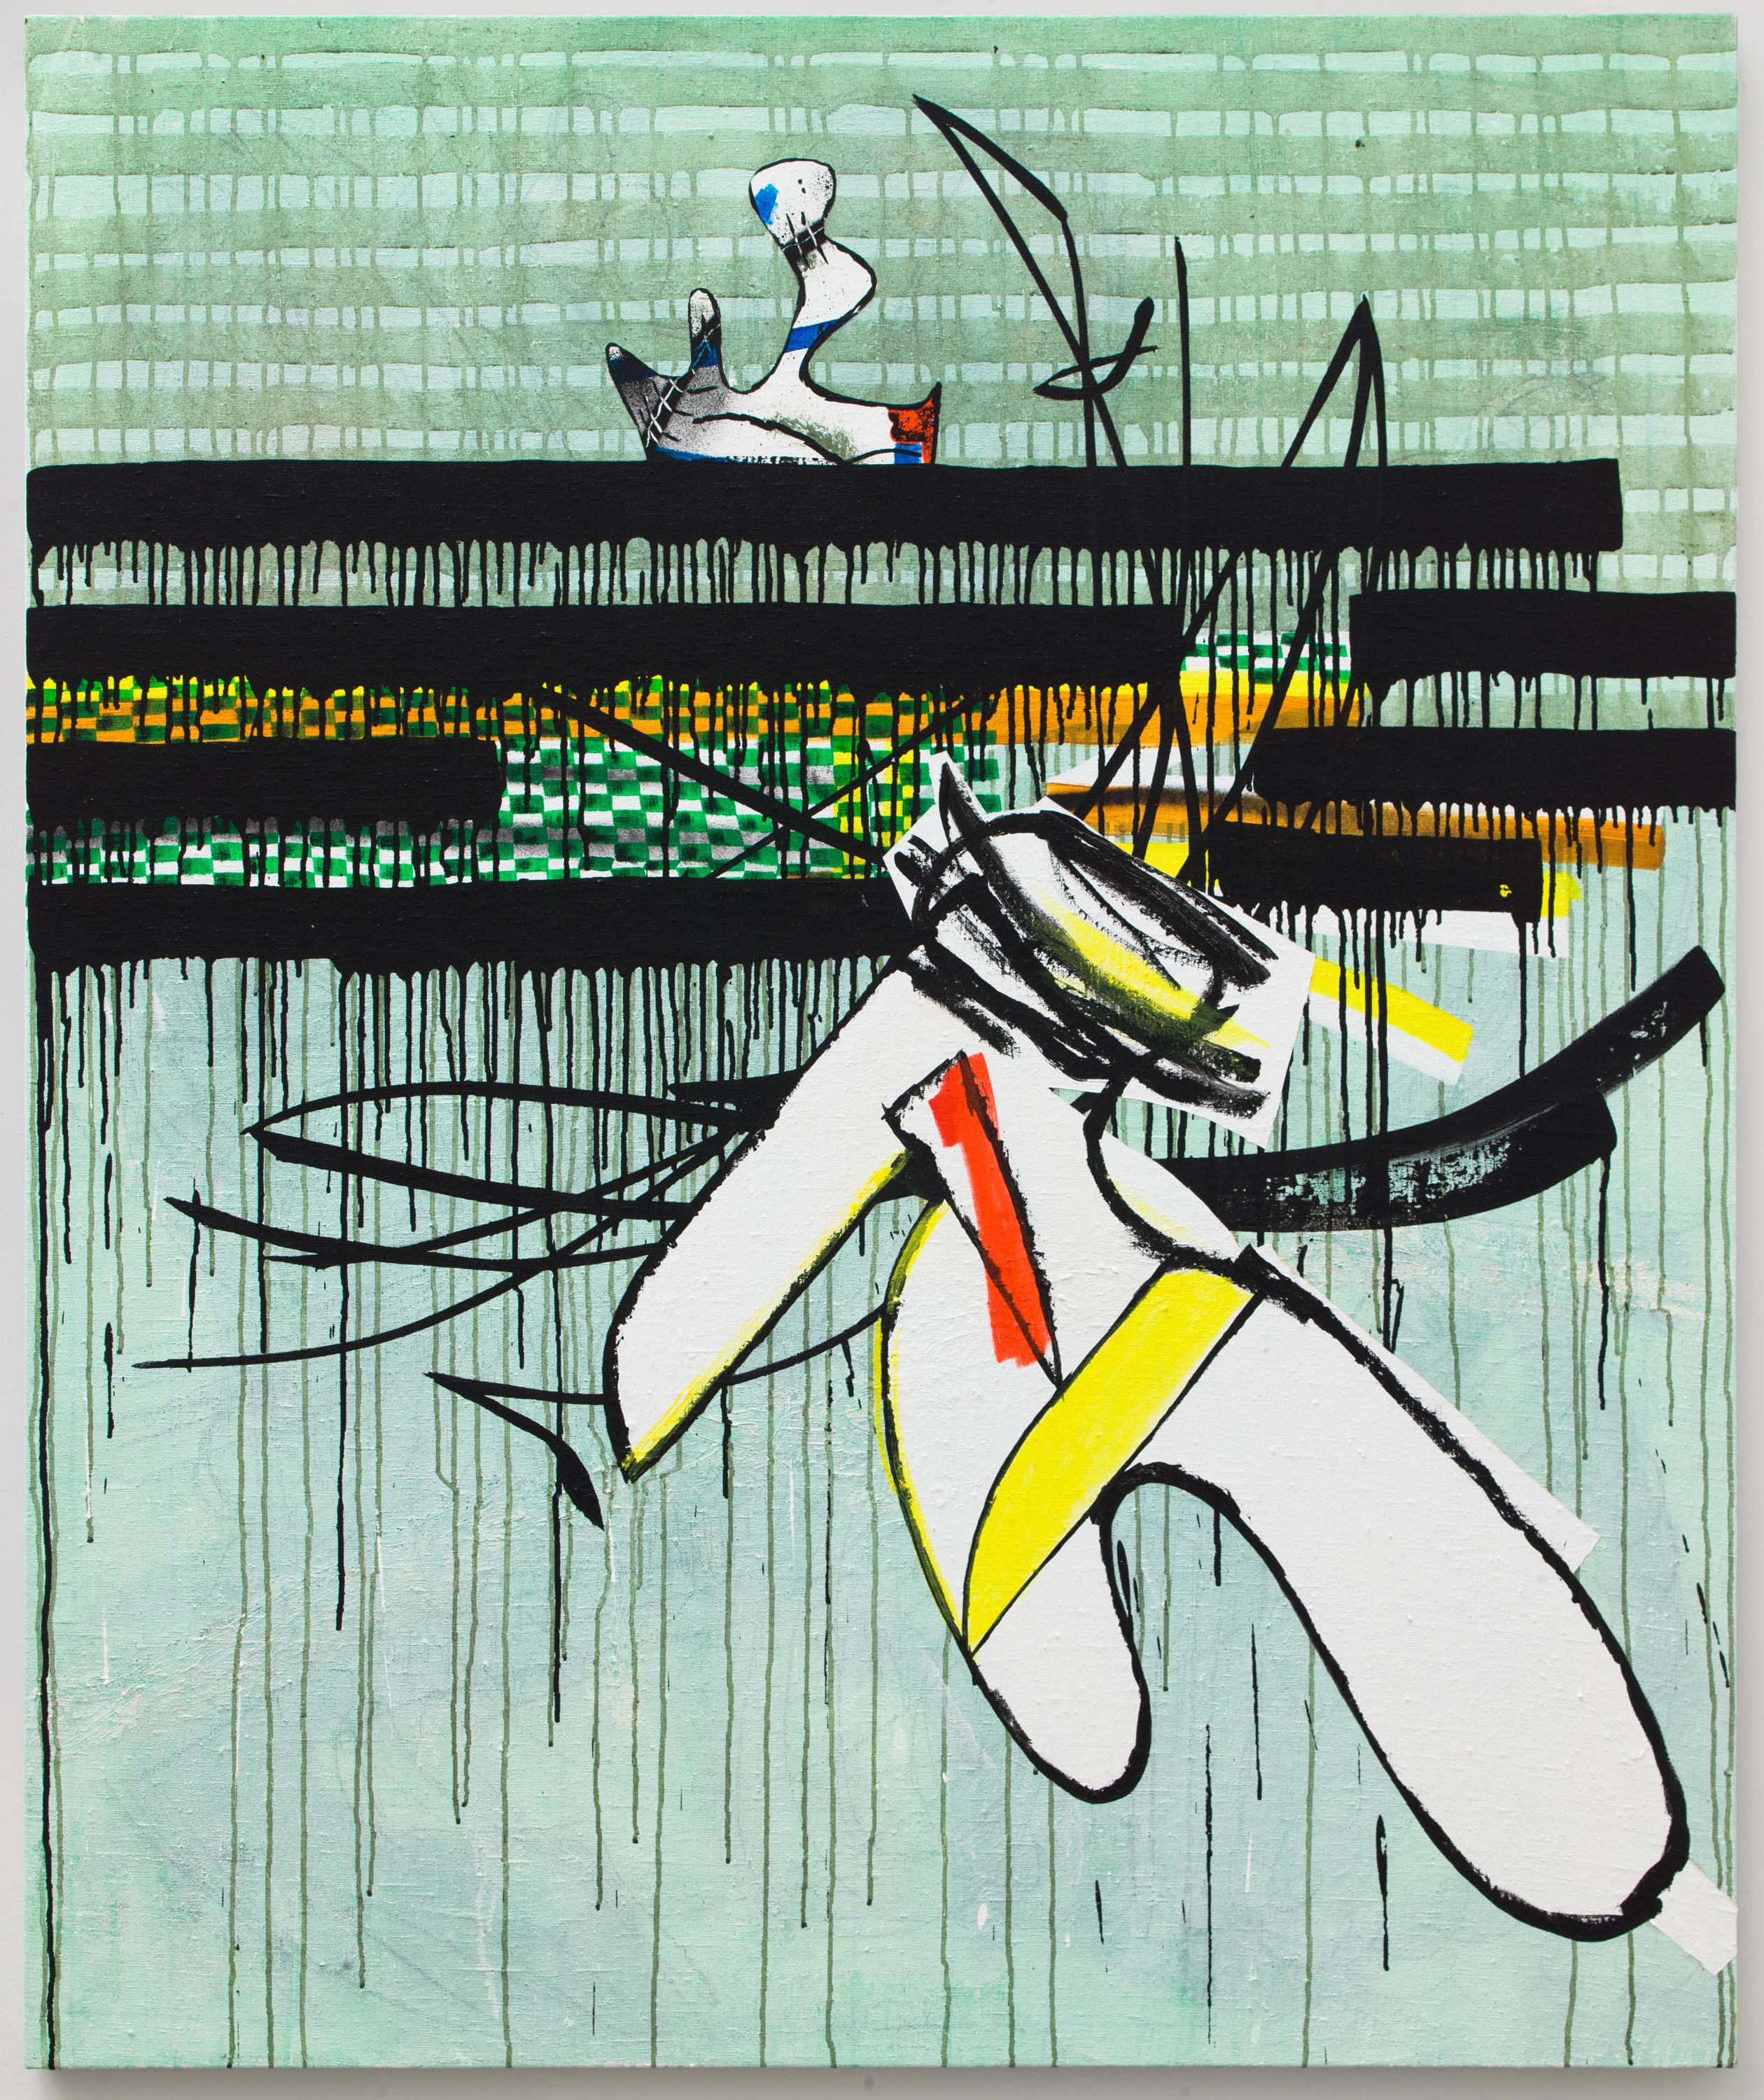 An abstract composition shows two black-and-white curved shapes with accents of primary colors against a more rigid background of mint green and black.